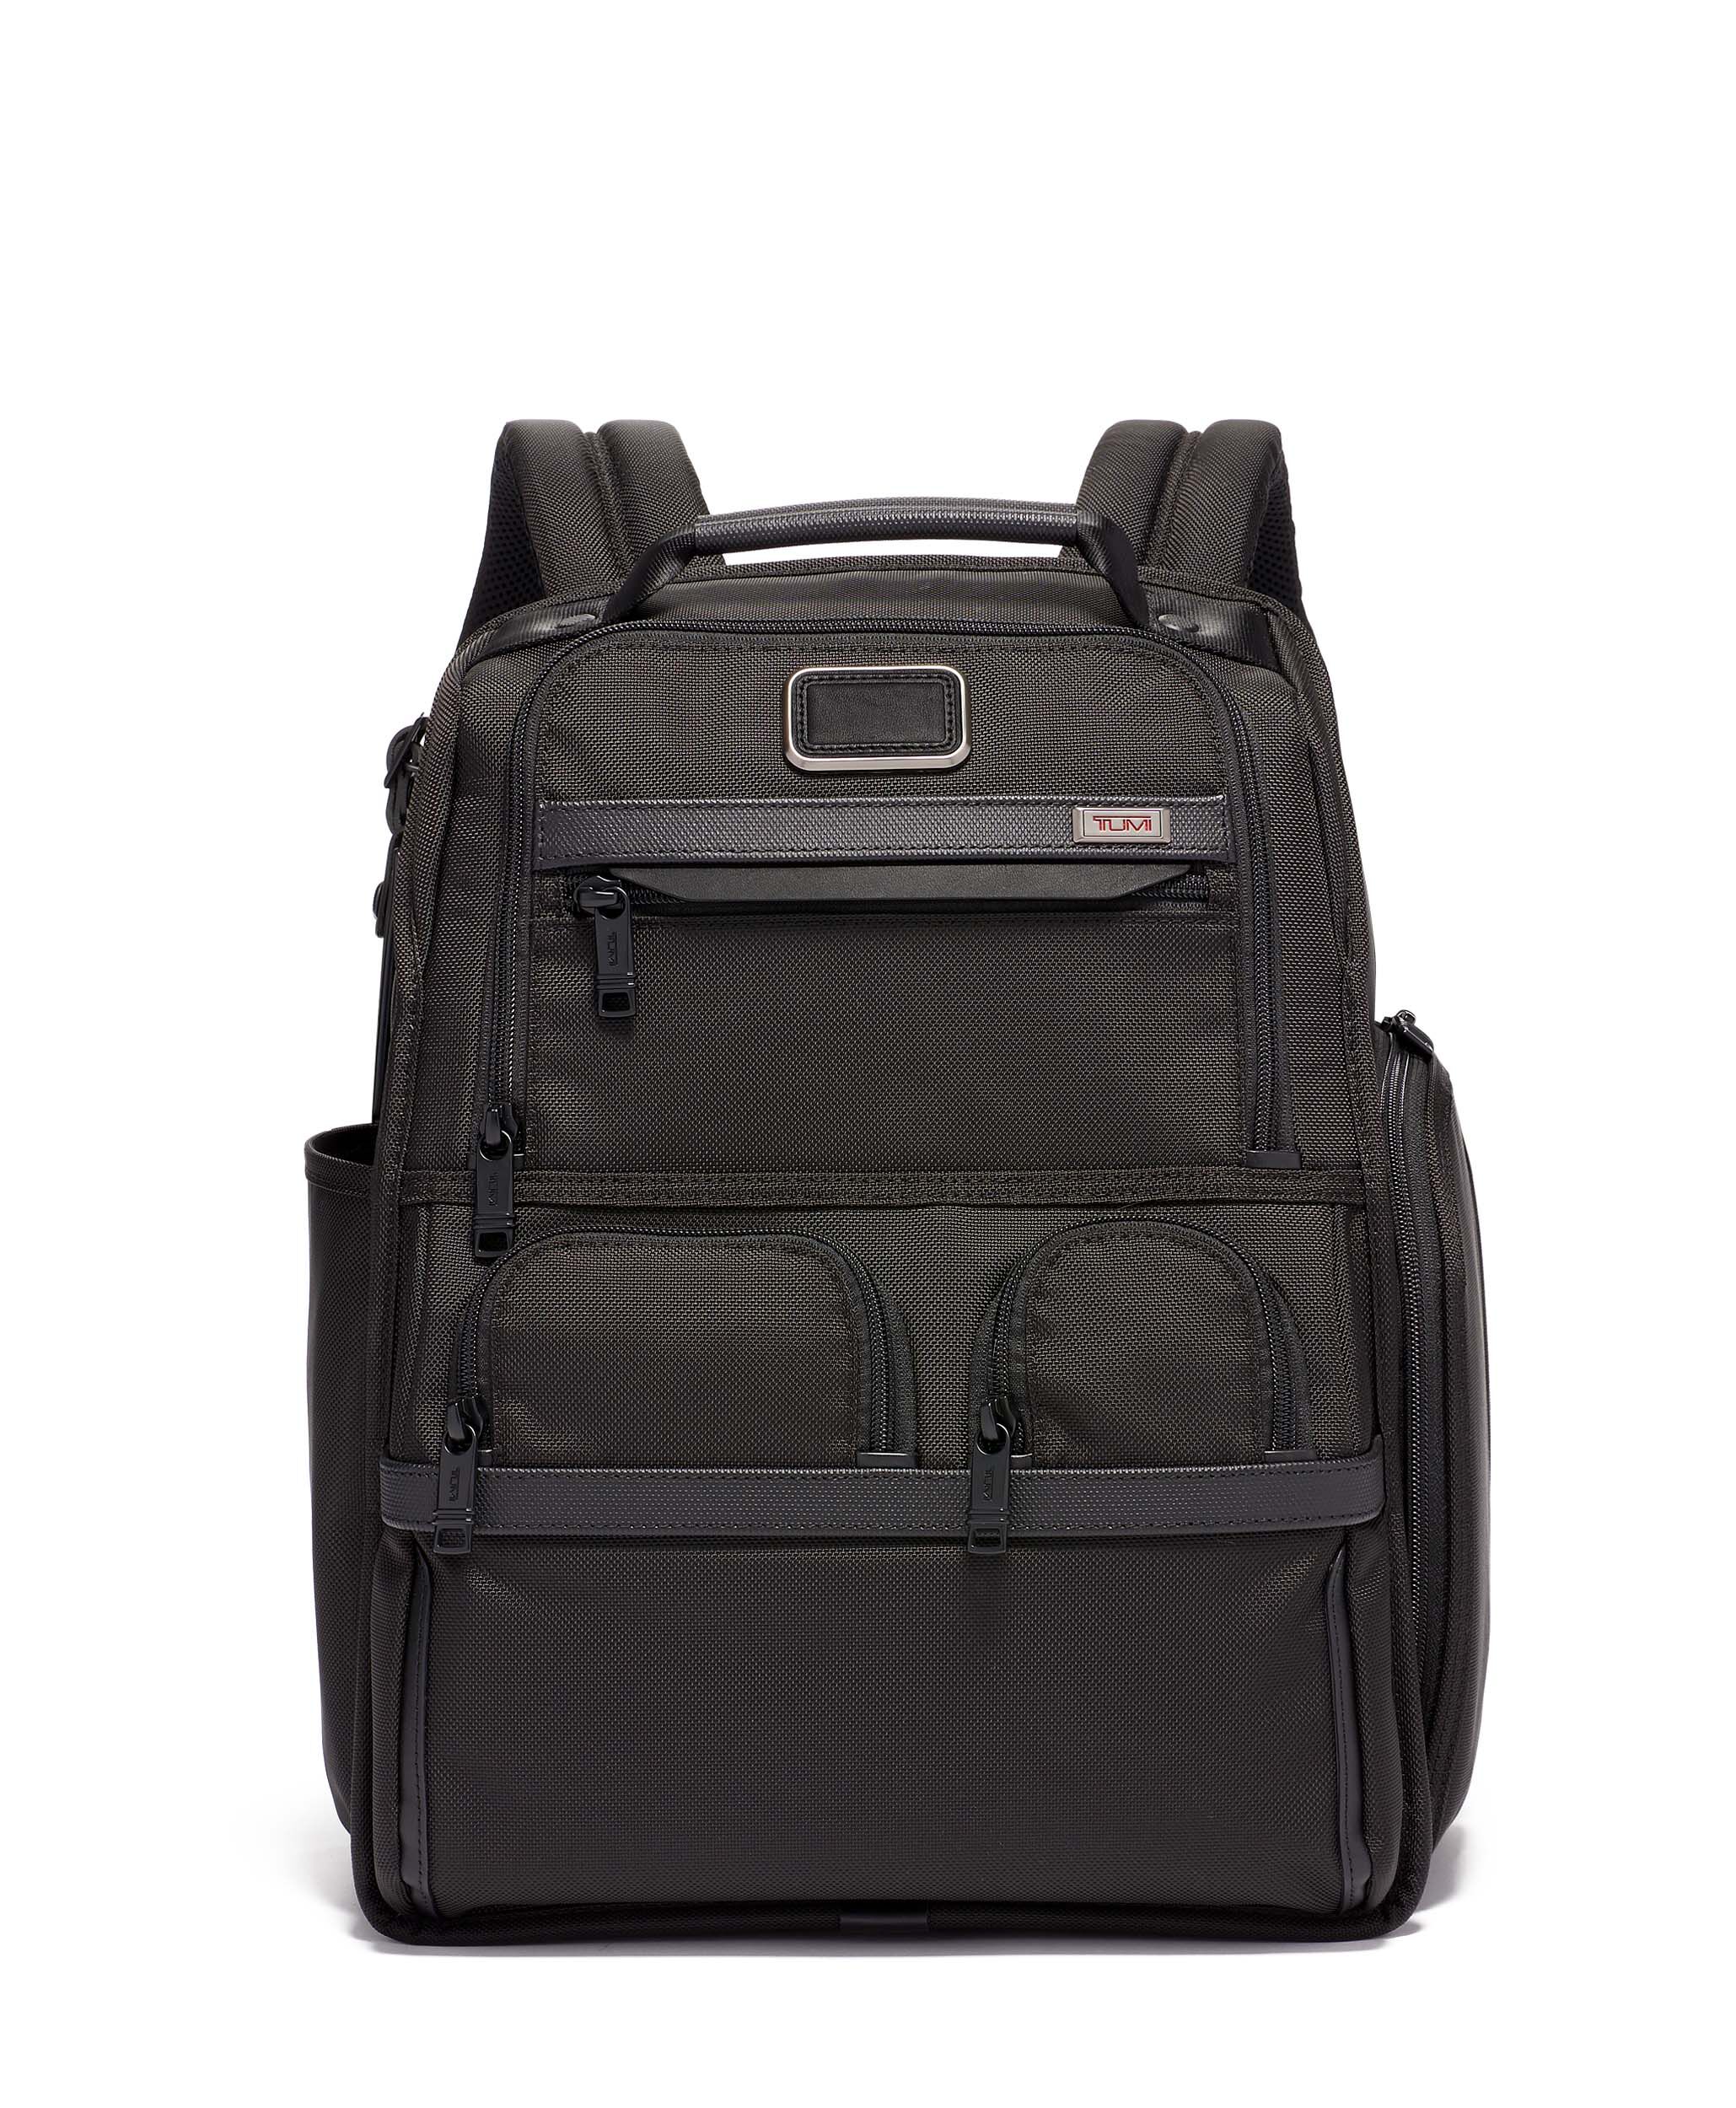 Alpha 3 Compact Laptop Brief Pack | TUMI Italy